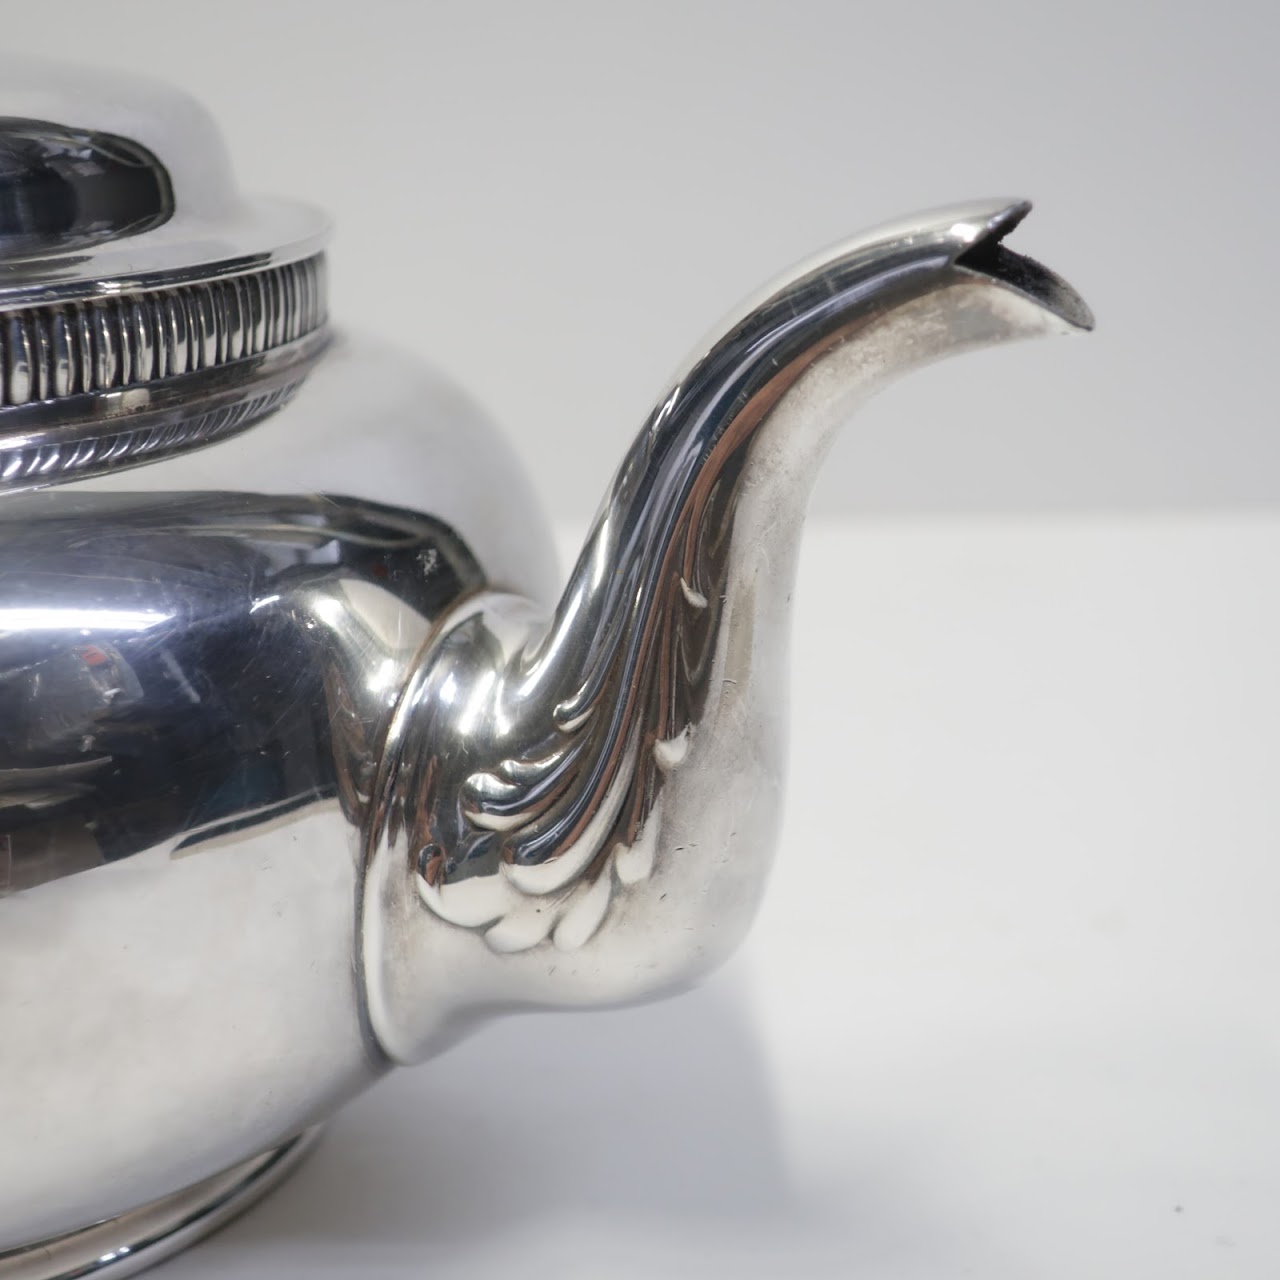 Tiffany & Co. Sterling Silver Teapot